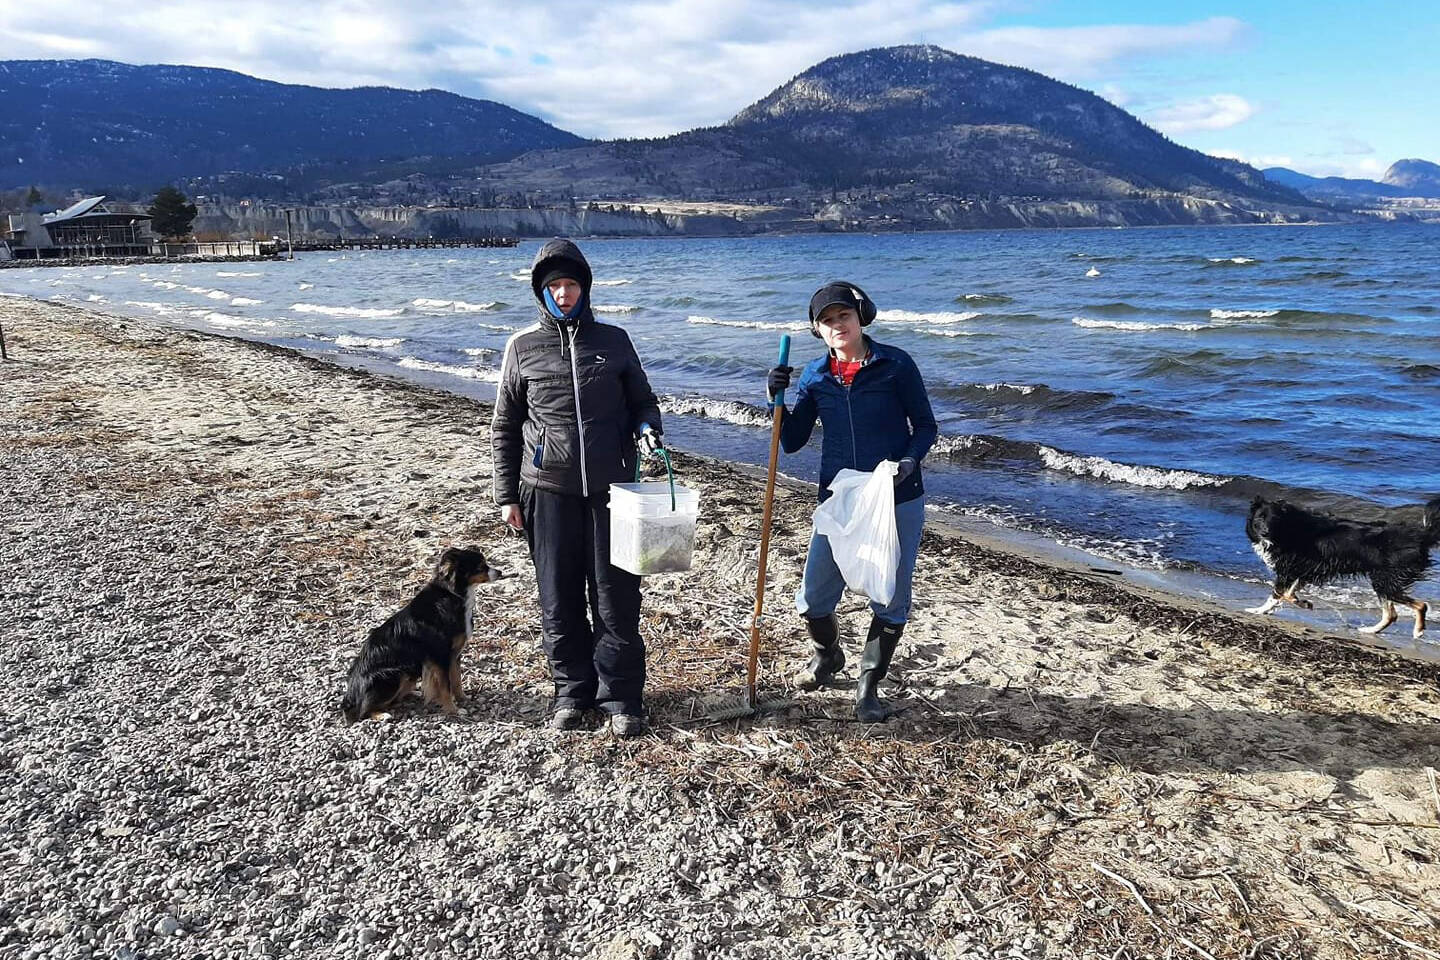 Pet Friendly Penticton founder Kona Sankey and another volunteer spent a windy Monday cleaning up the dog beach at Okanagan Lake during Acts of Kindness week in Penticton. (Submitted)